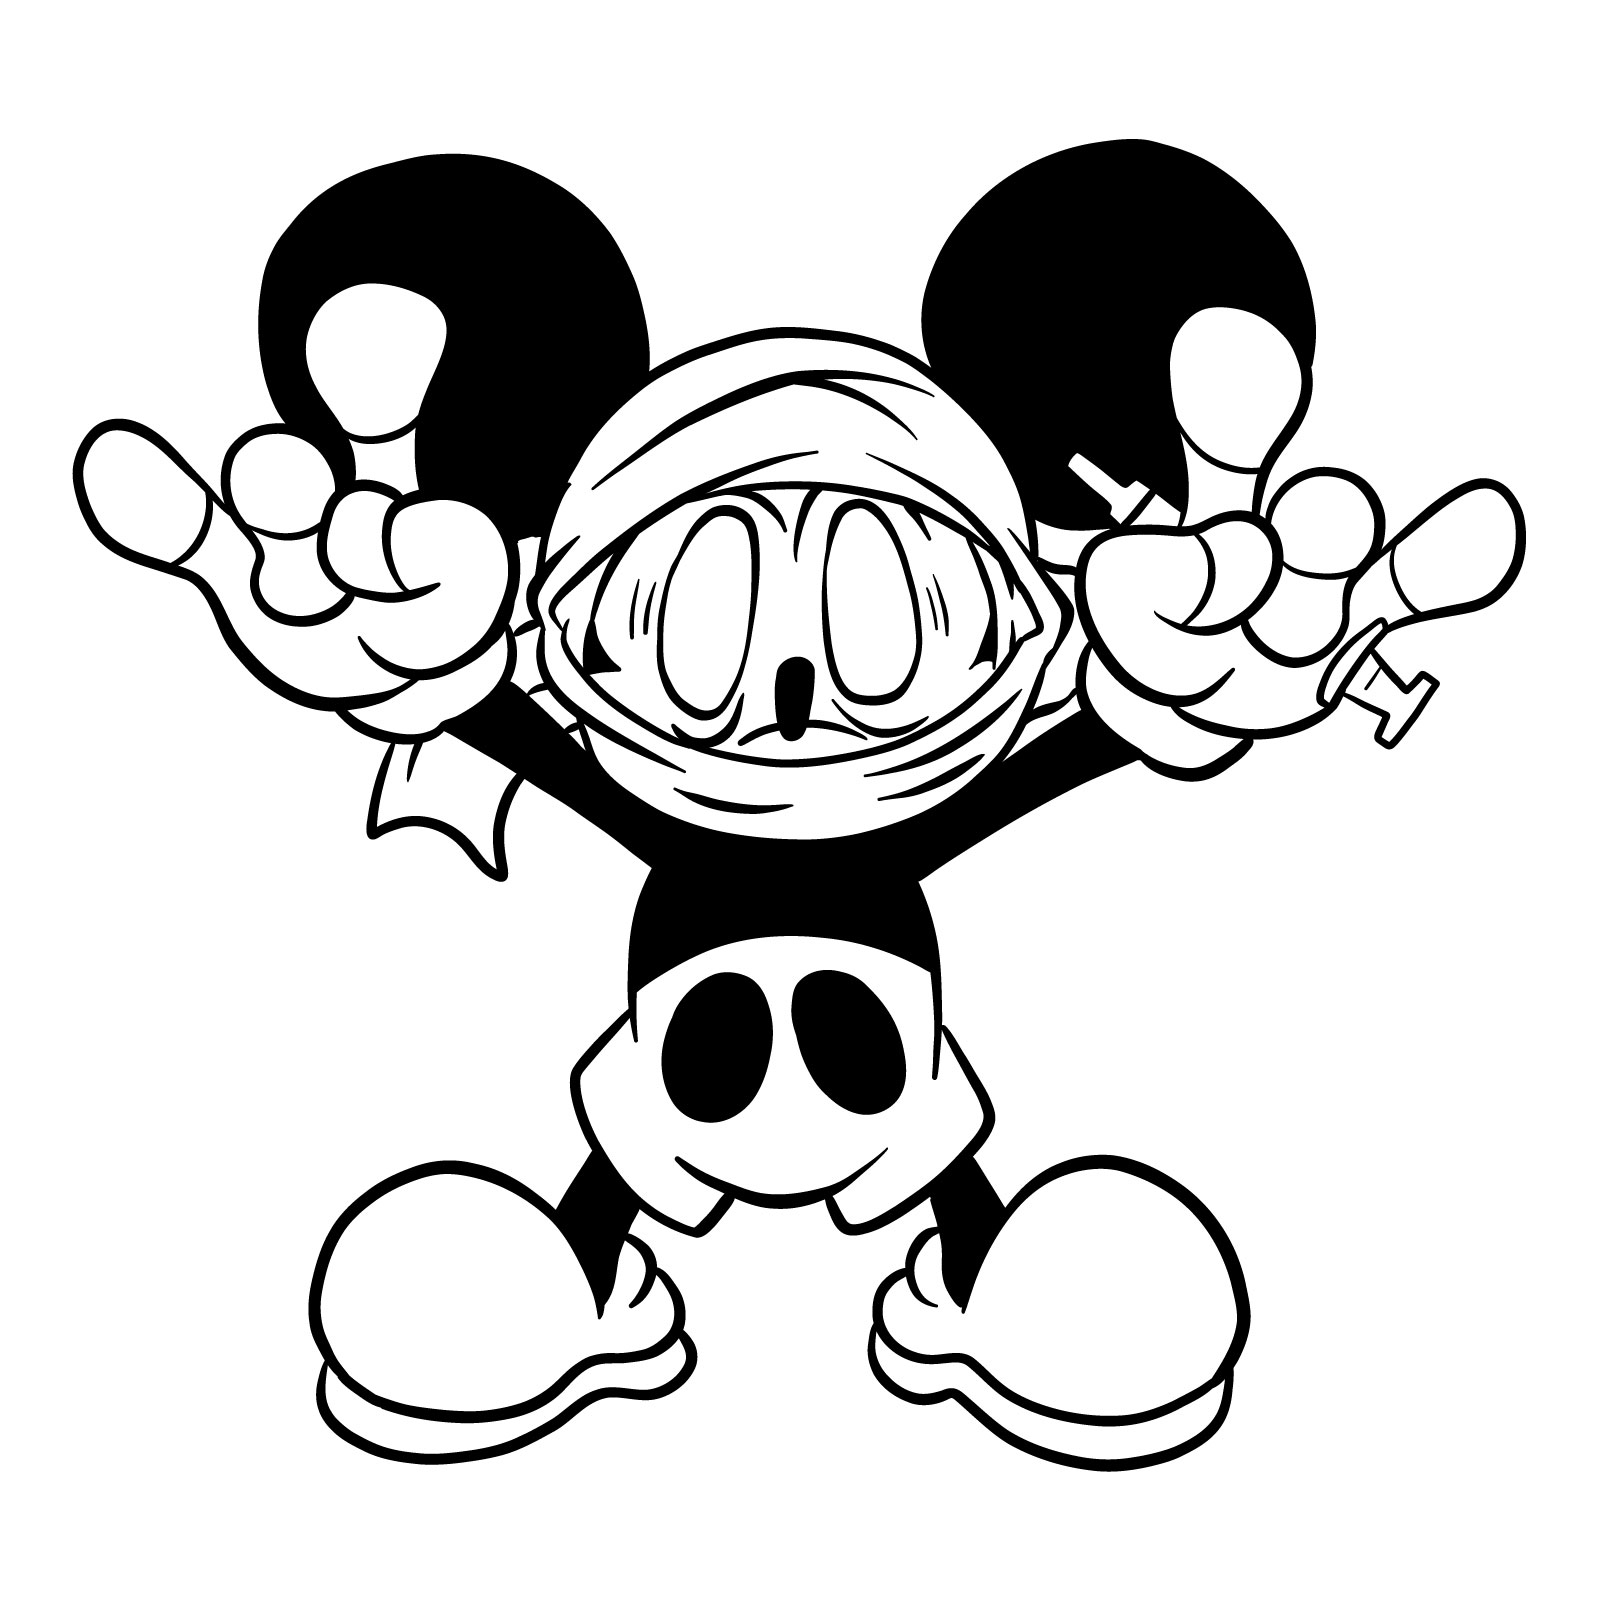 How to draw battered Mickey taunting - final step